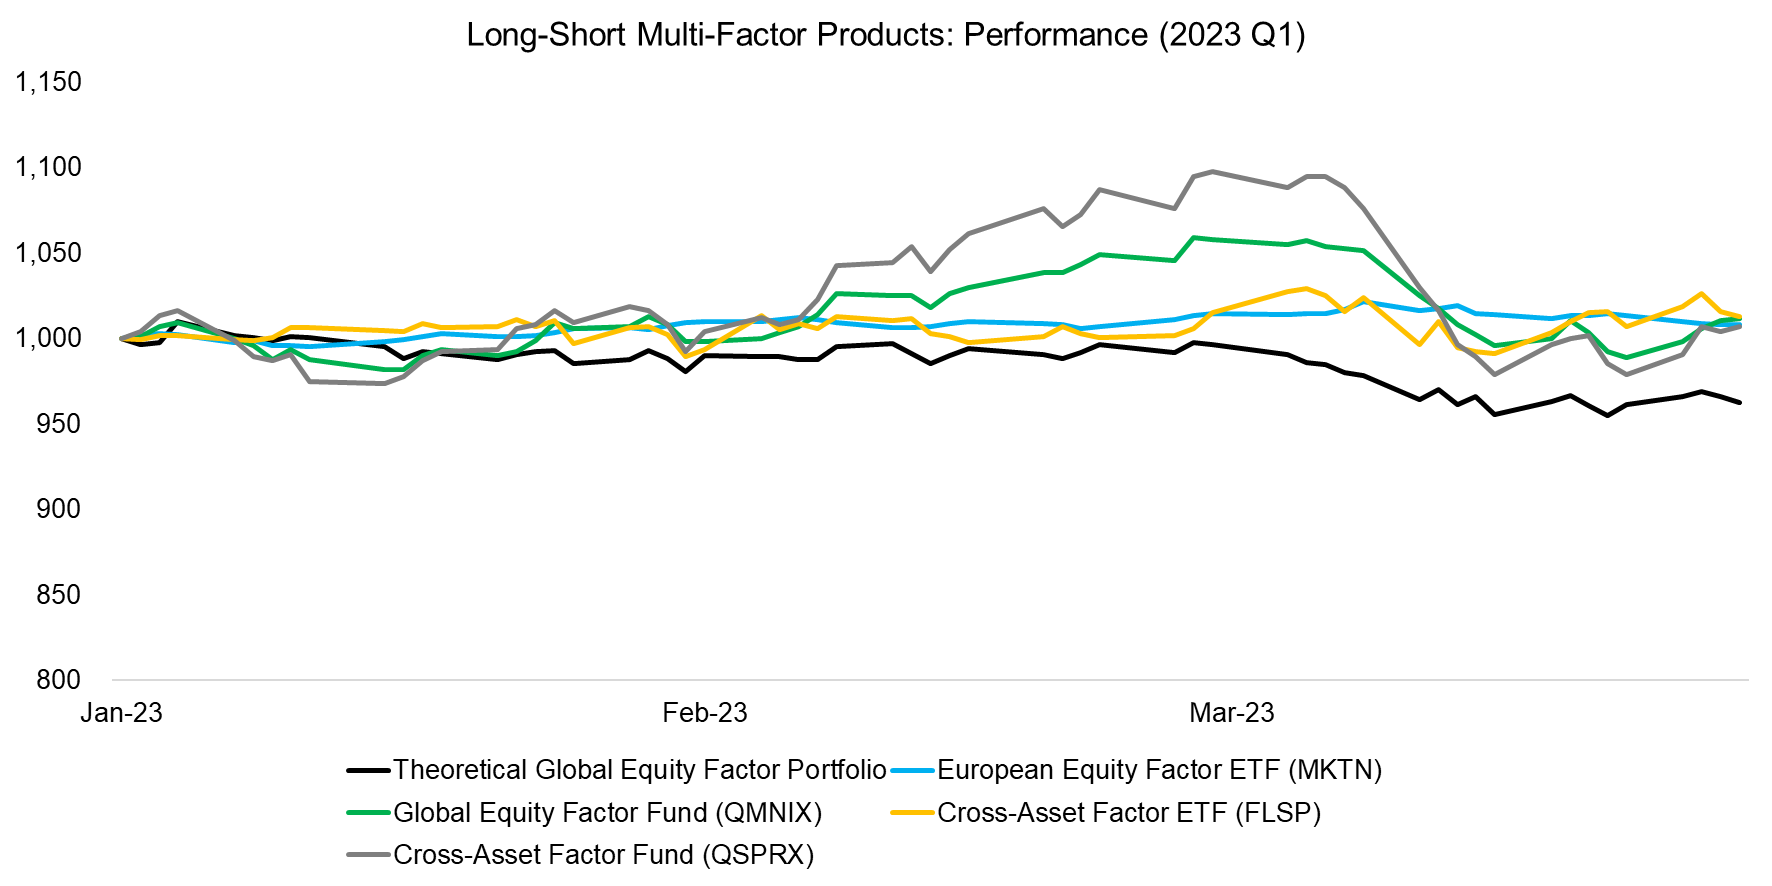 Long-Short Multi-Factor Products Performance 2022